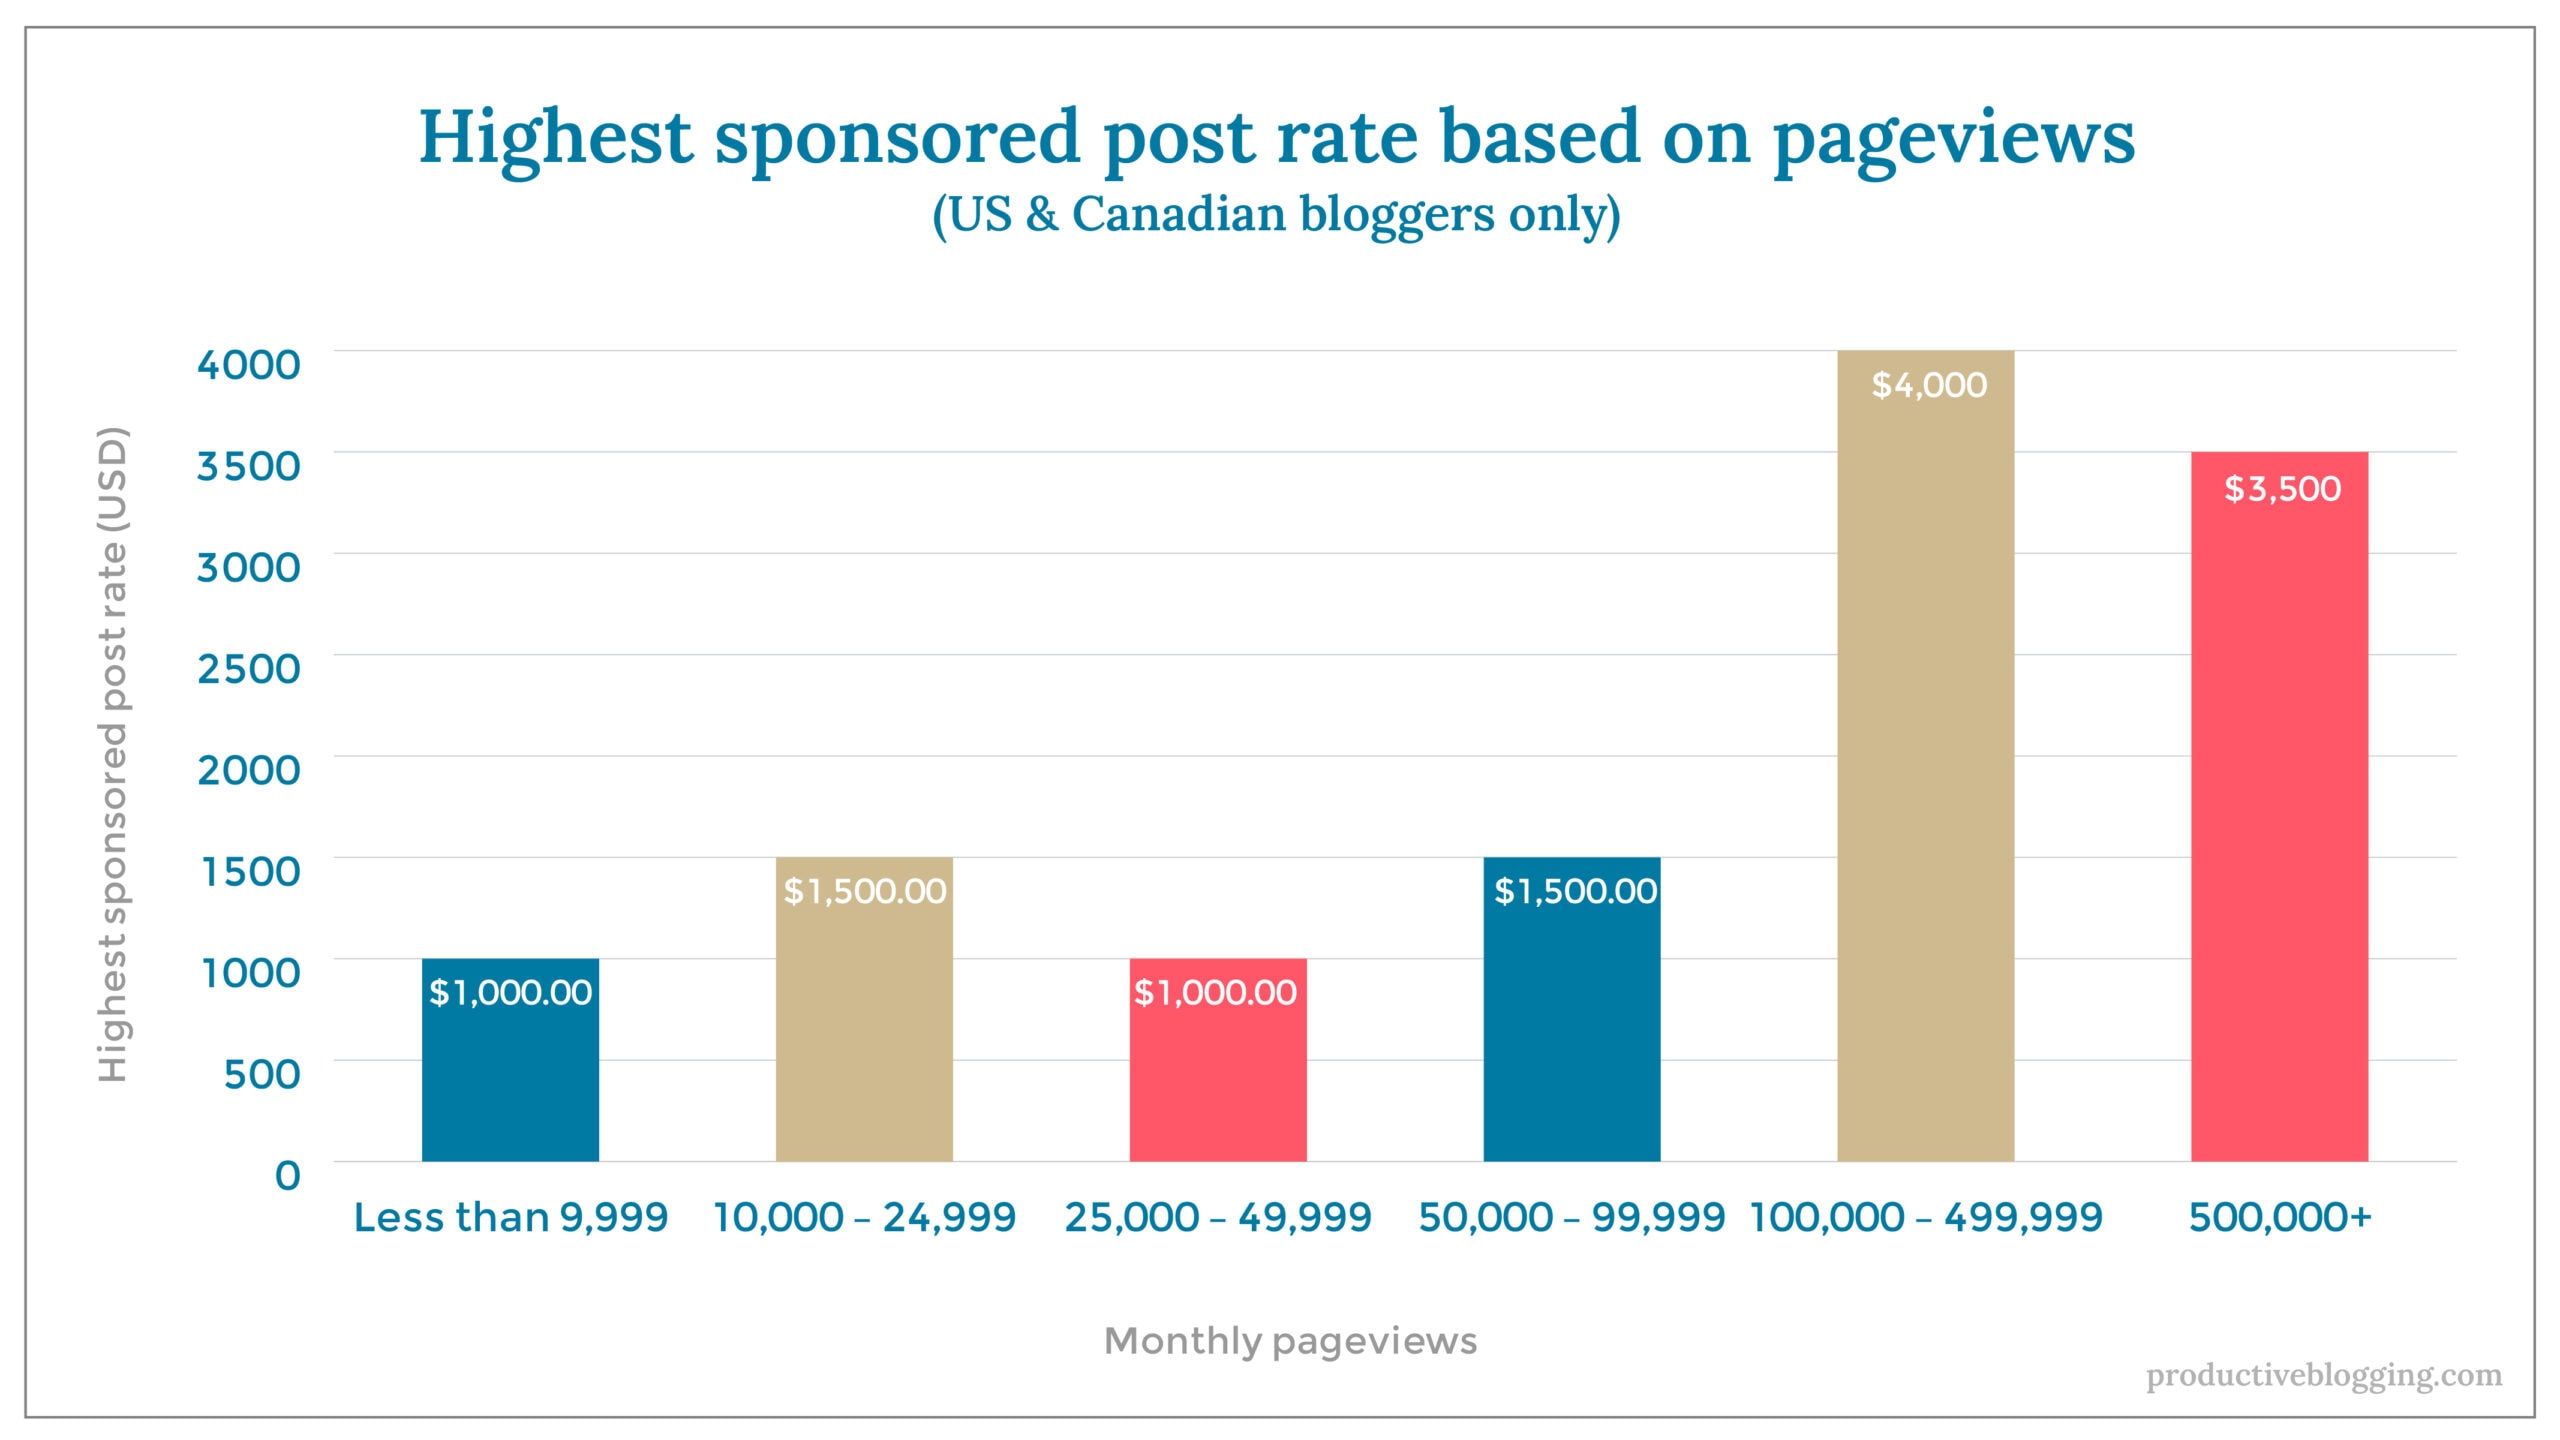 Highest sponsored post rate based on pageviews (US & Canadian bloggers only) X axis: Monthly pageviews Y axis: Highest sponsored post rate (USD) Less than 9,999 $1,000 10,000 – 24,999 $1,500 25,000 – 49,999 $1,000 50,000 – 99,999 $1,500 100,000 – 499,999 $4,000 500,000+ $3,500